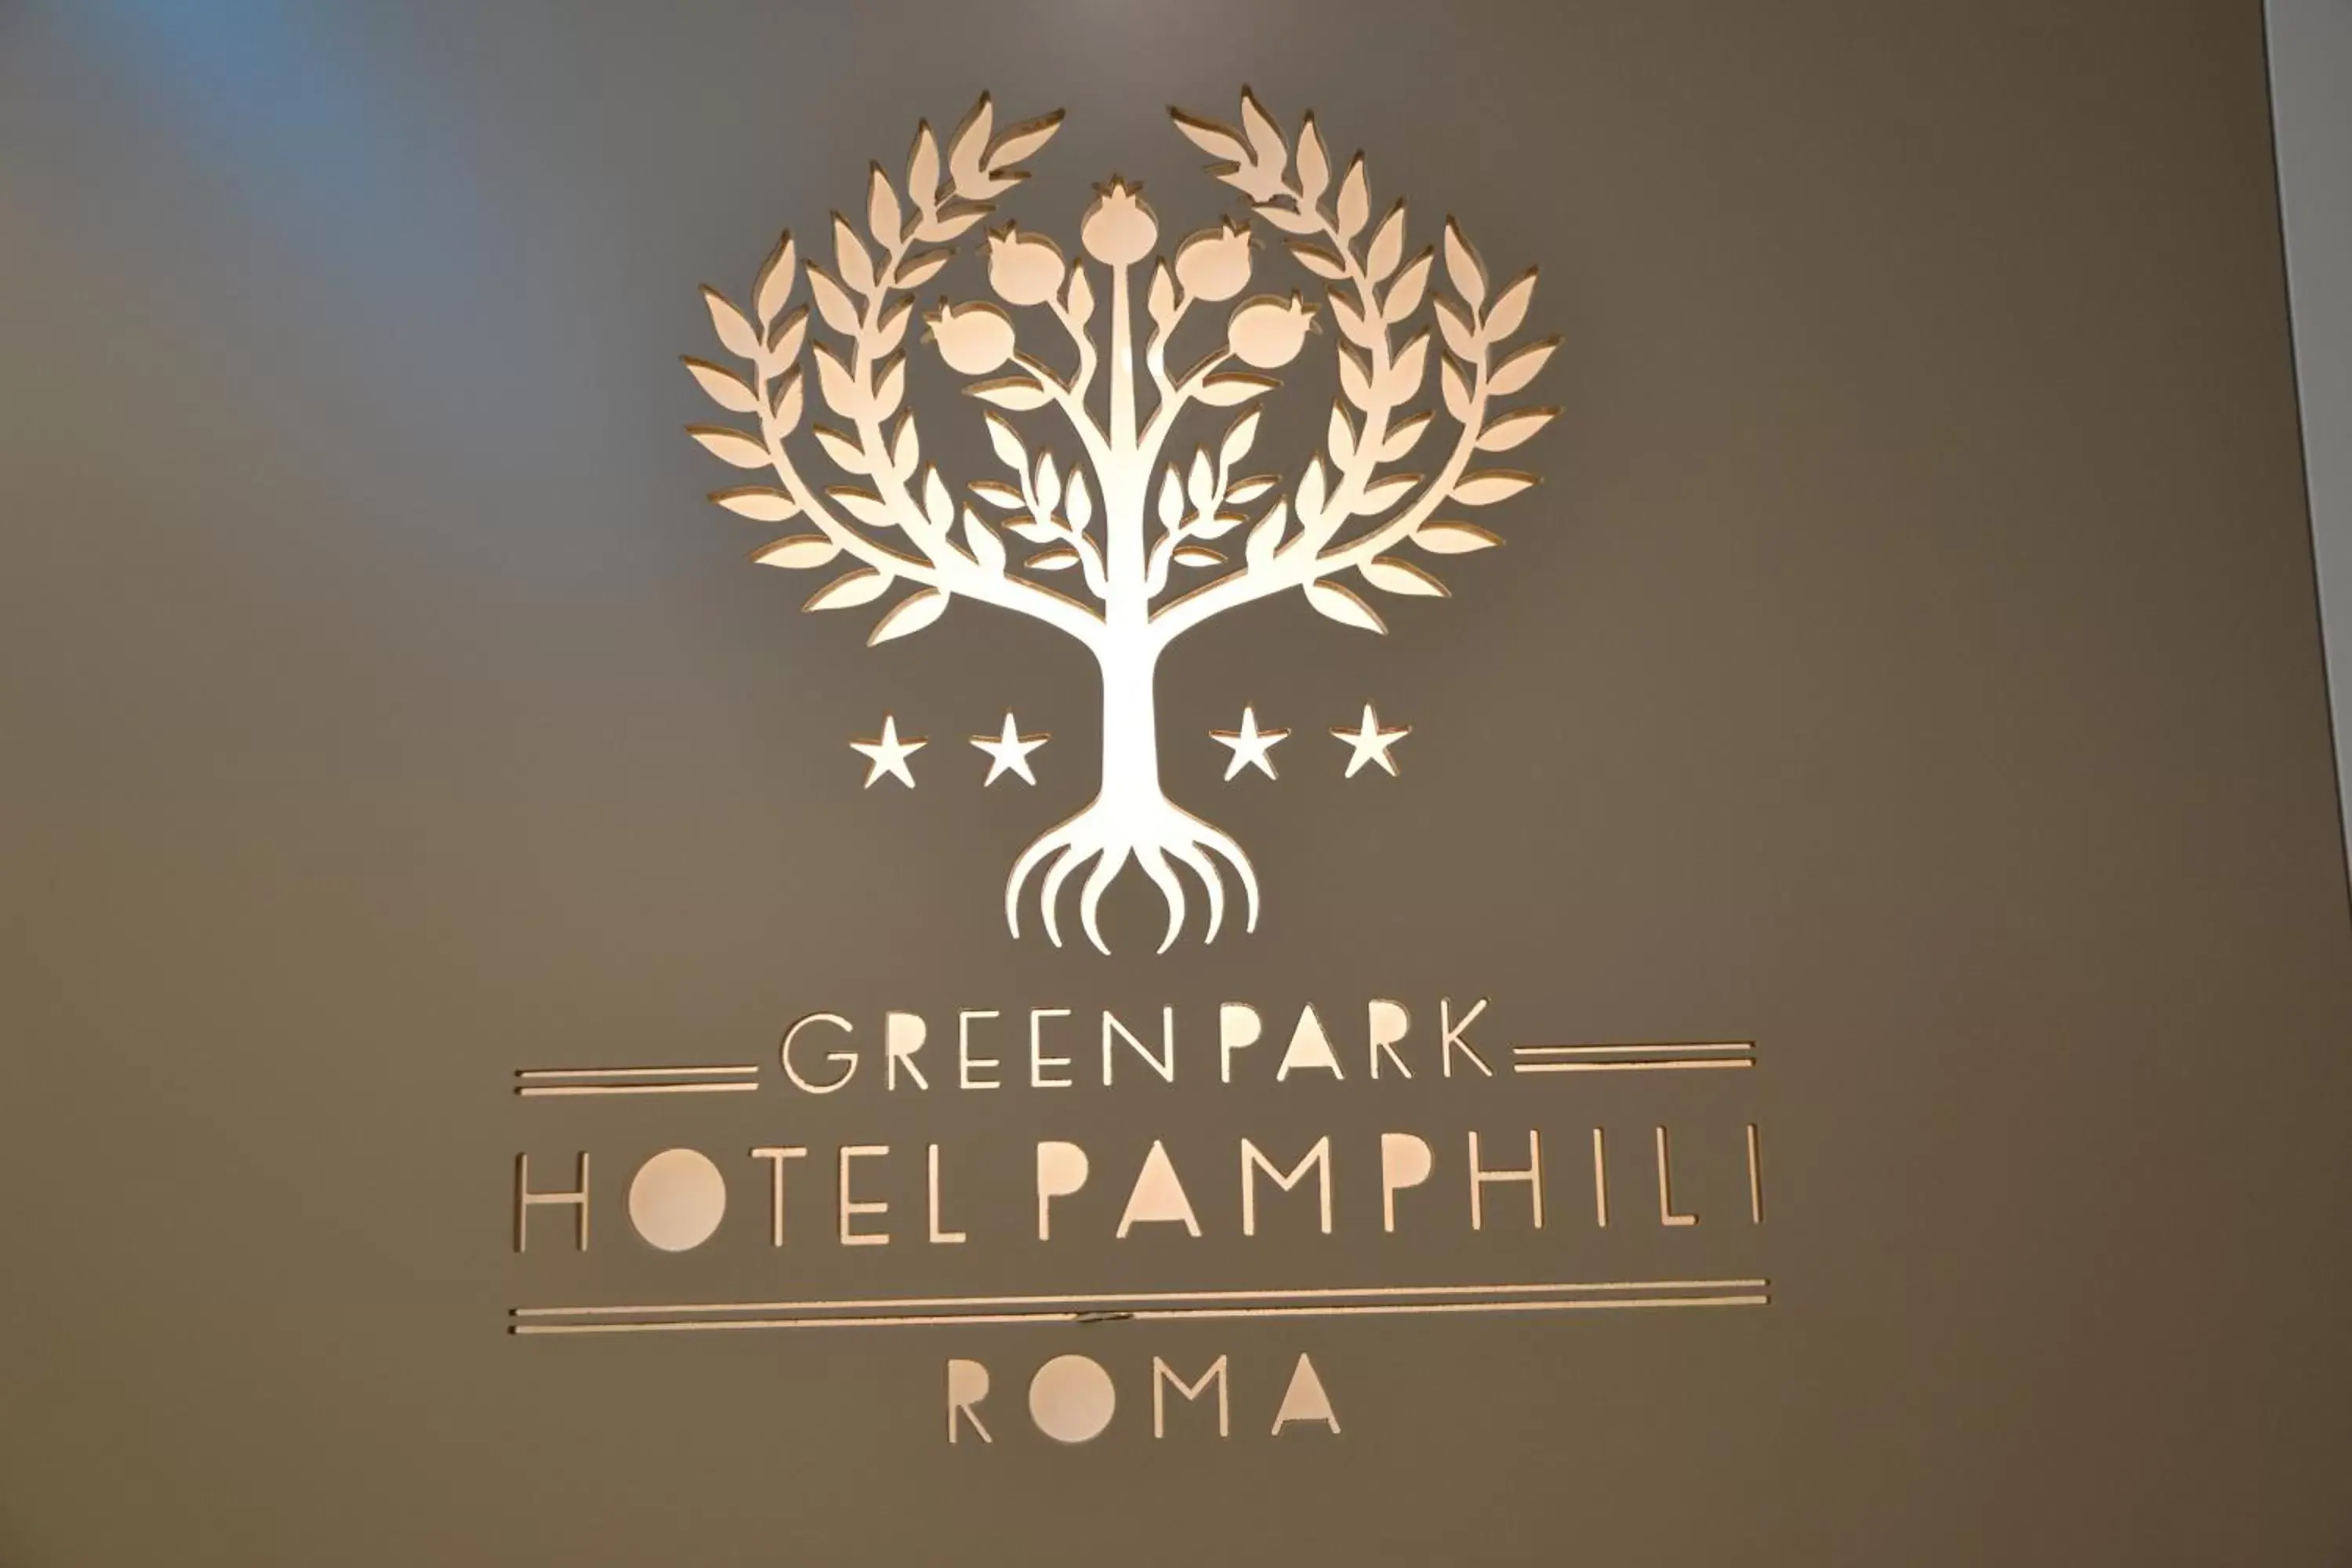 Property logo or sign, Property Logo/Sign in Ele Green Park Hotel Pamphili